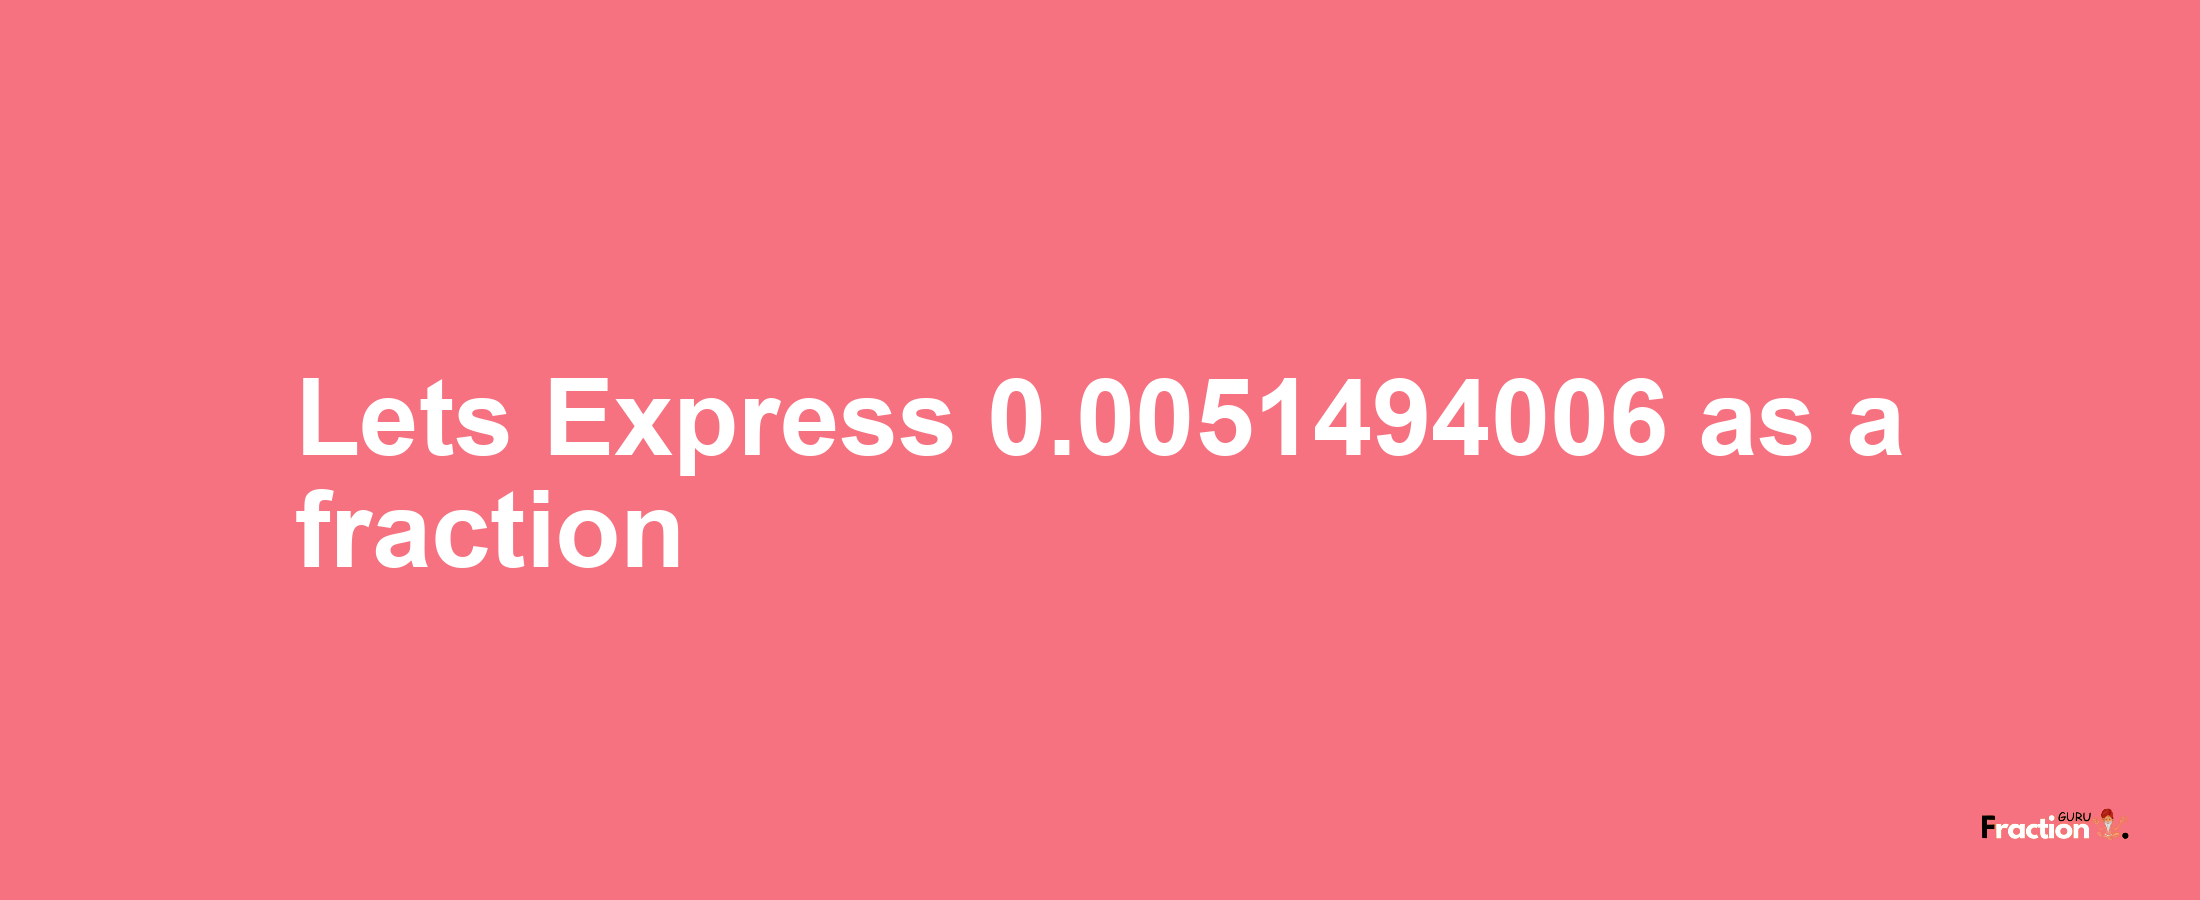 Lets Express 0.0051494006 as afraction